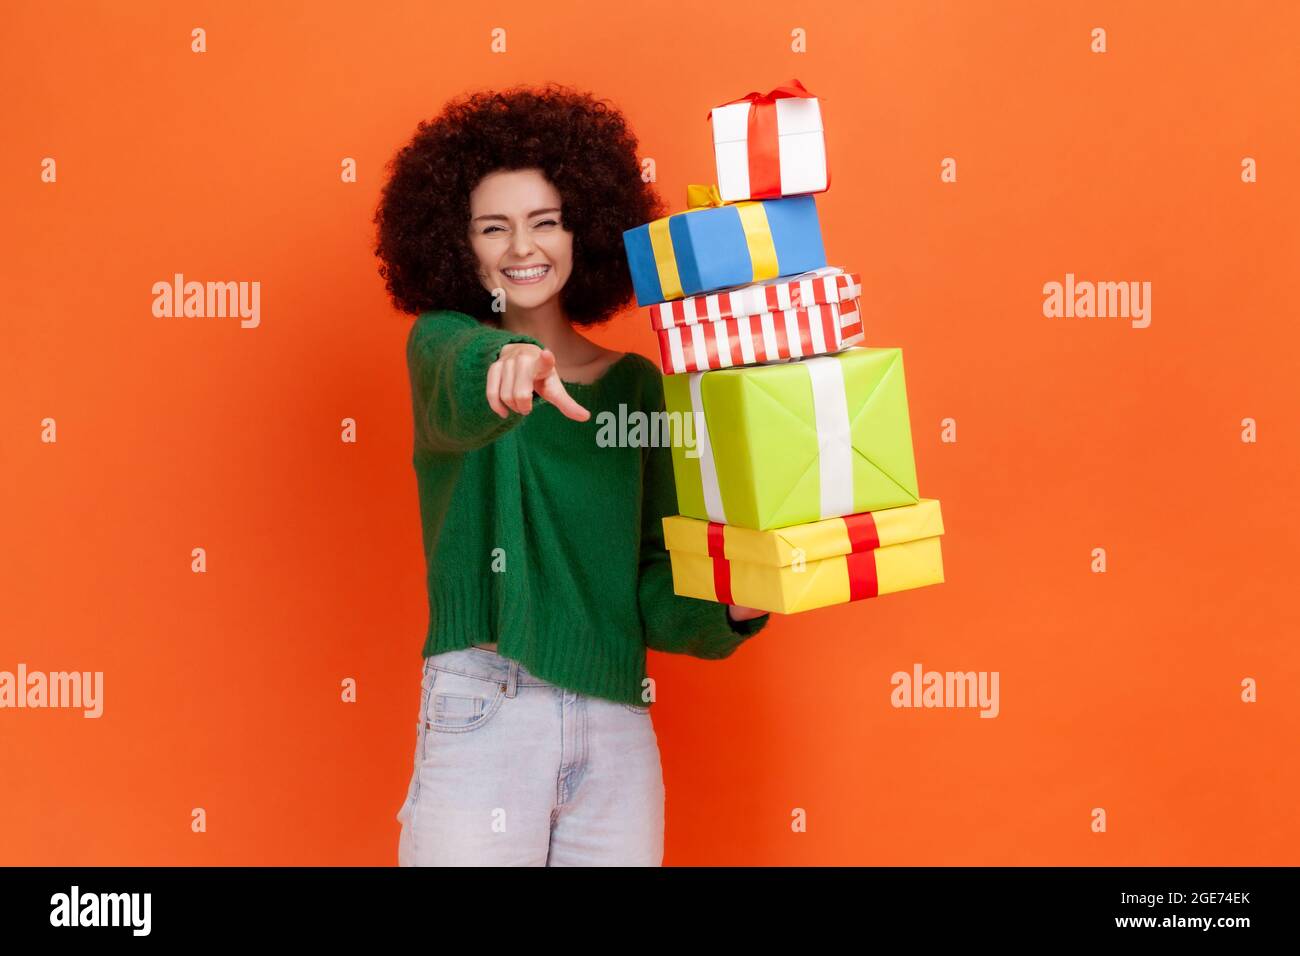 Beautiful woman with curly hair wearing green casual style sweater pointing finger to camera, holding stack of presents, choosing you as winner. Indoo Stock Photo